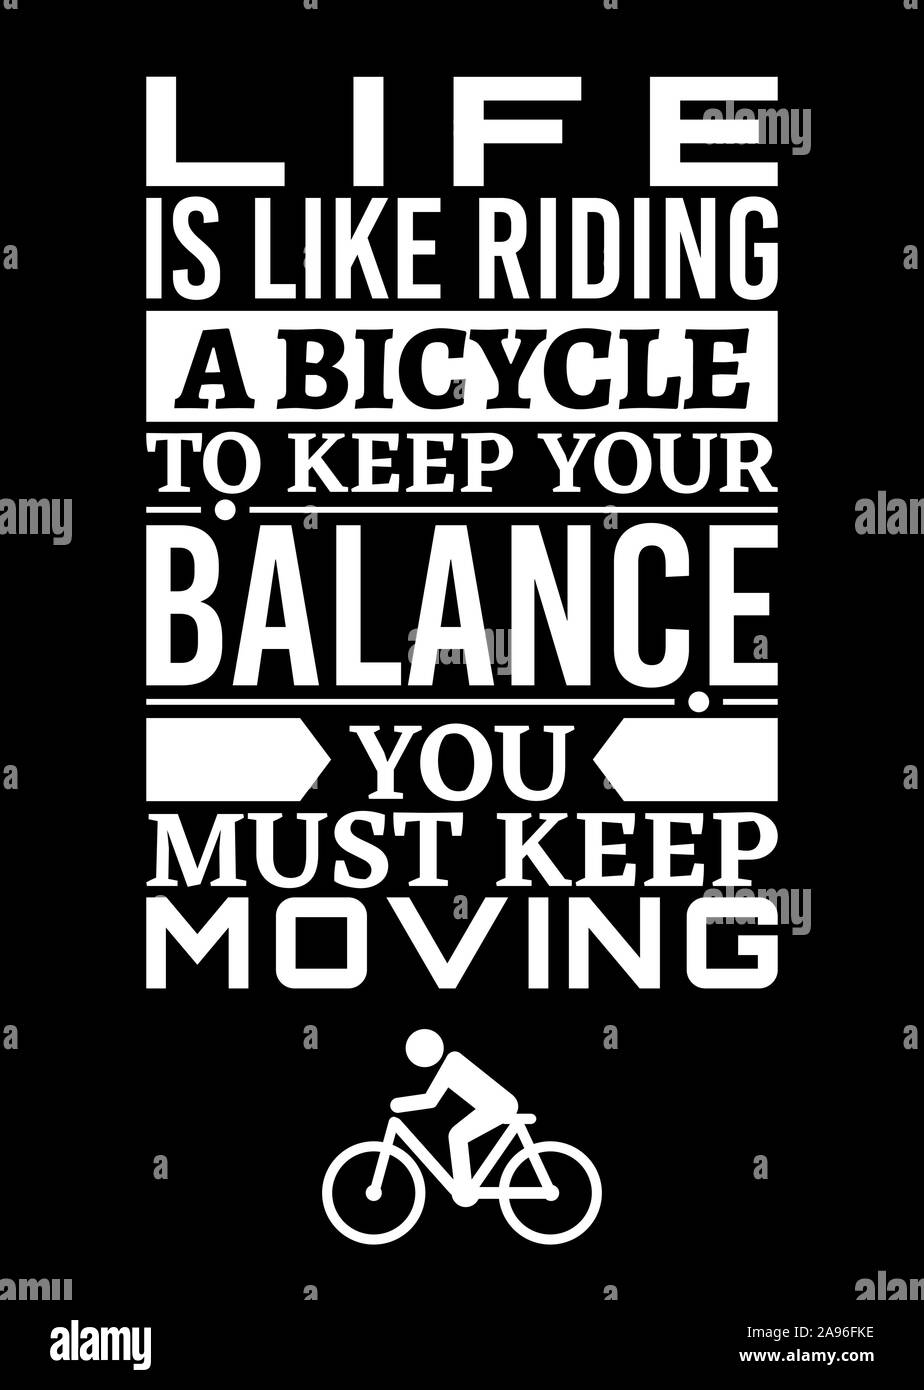 Printable Royalty Free Life Is Like Riding A Bicycle To Keep Your Balance You Must Keep Moving